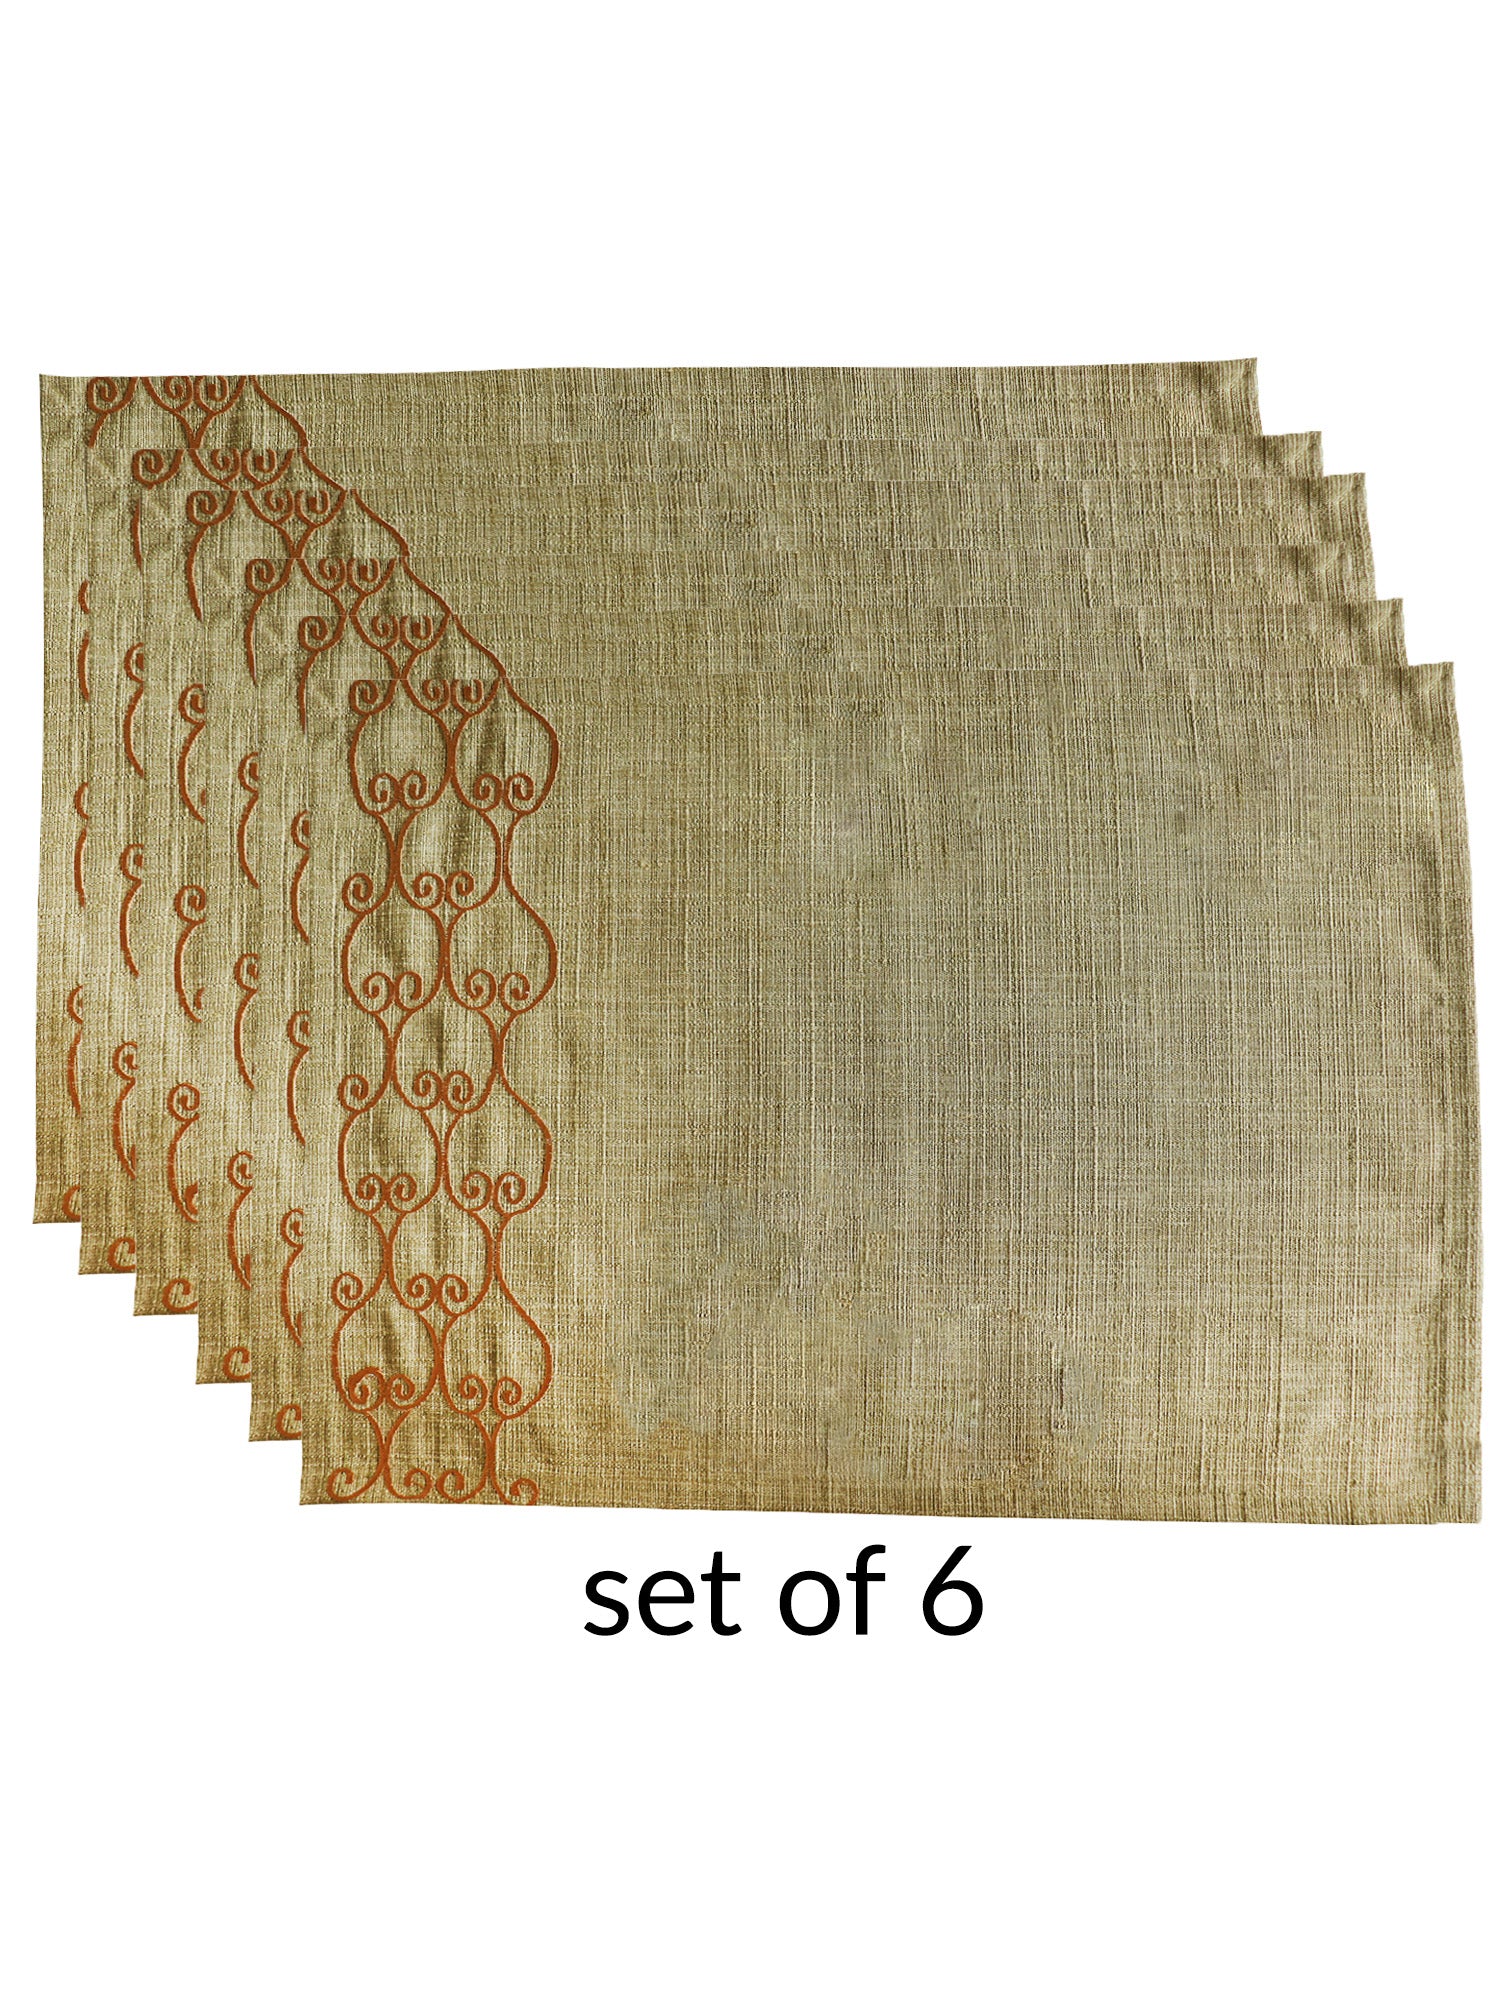 set of 6 embroidered mats in sage green color - 13x19 inch